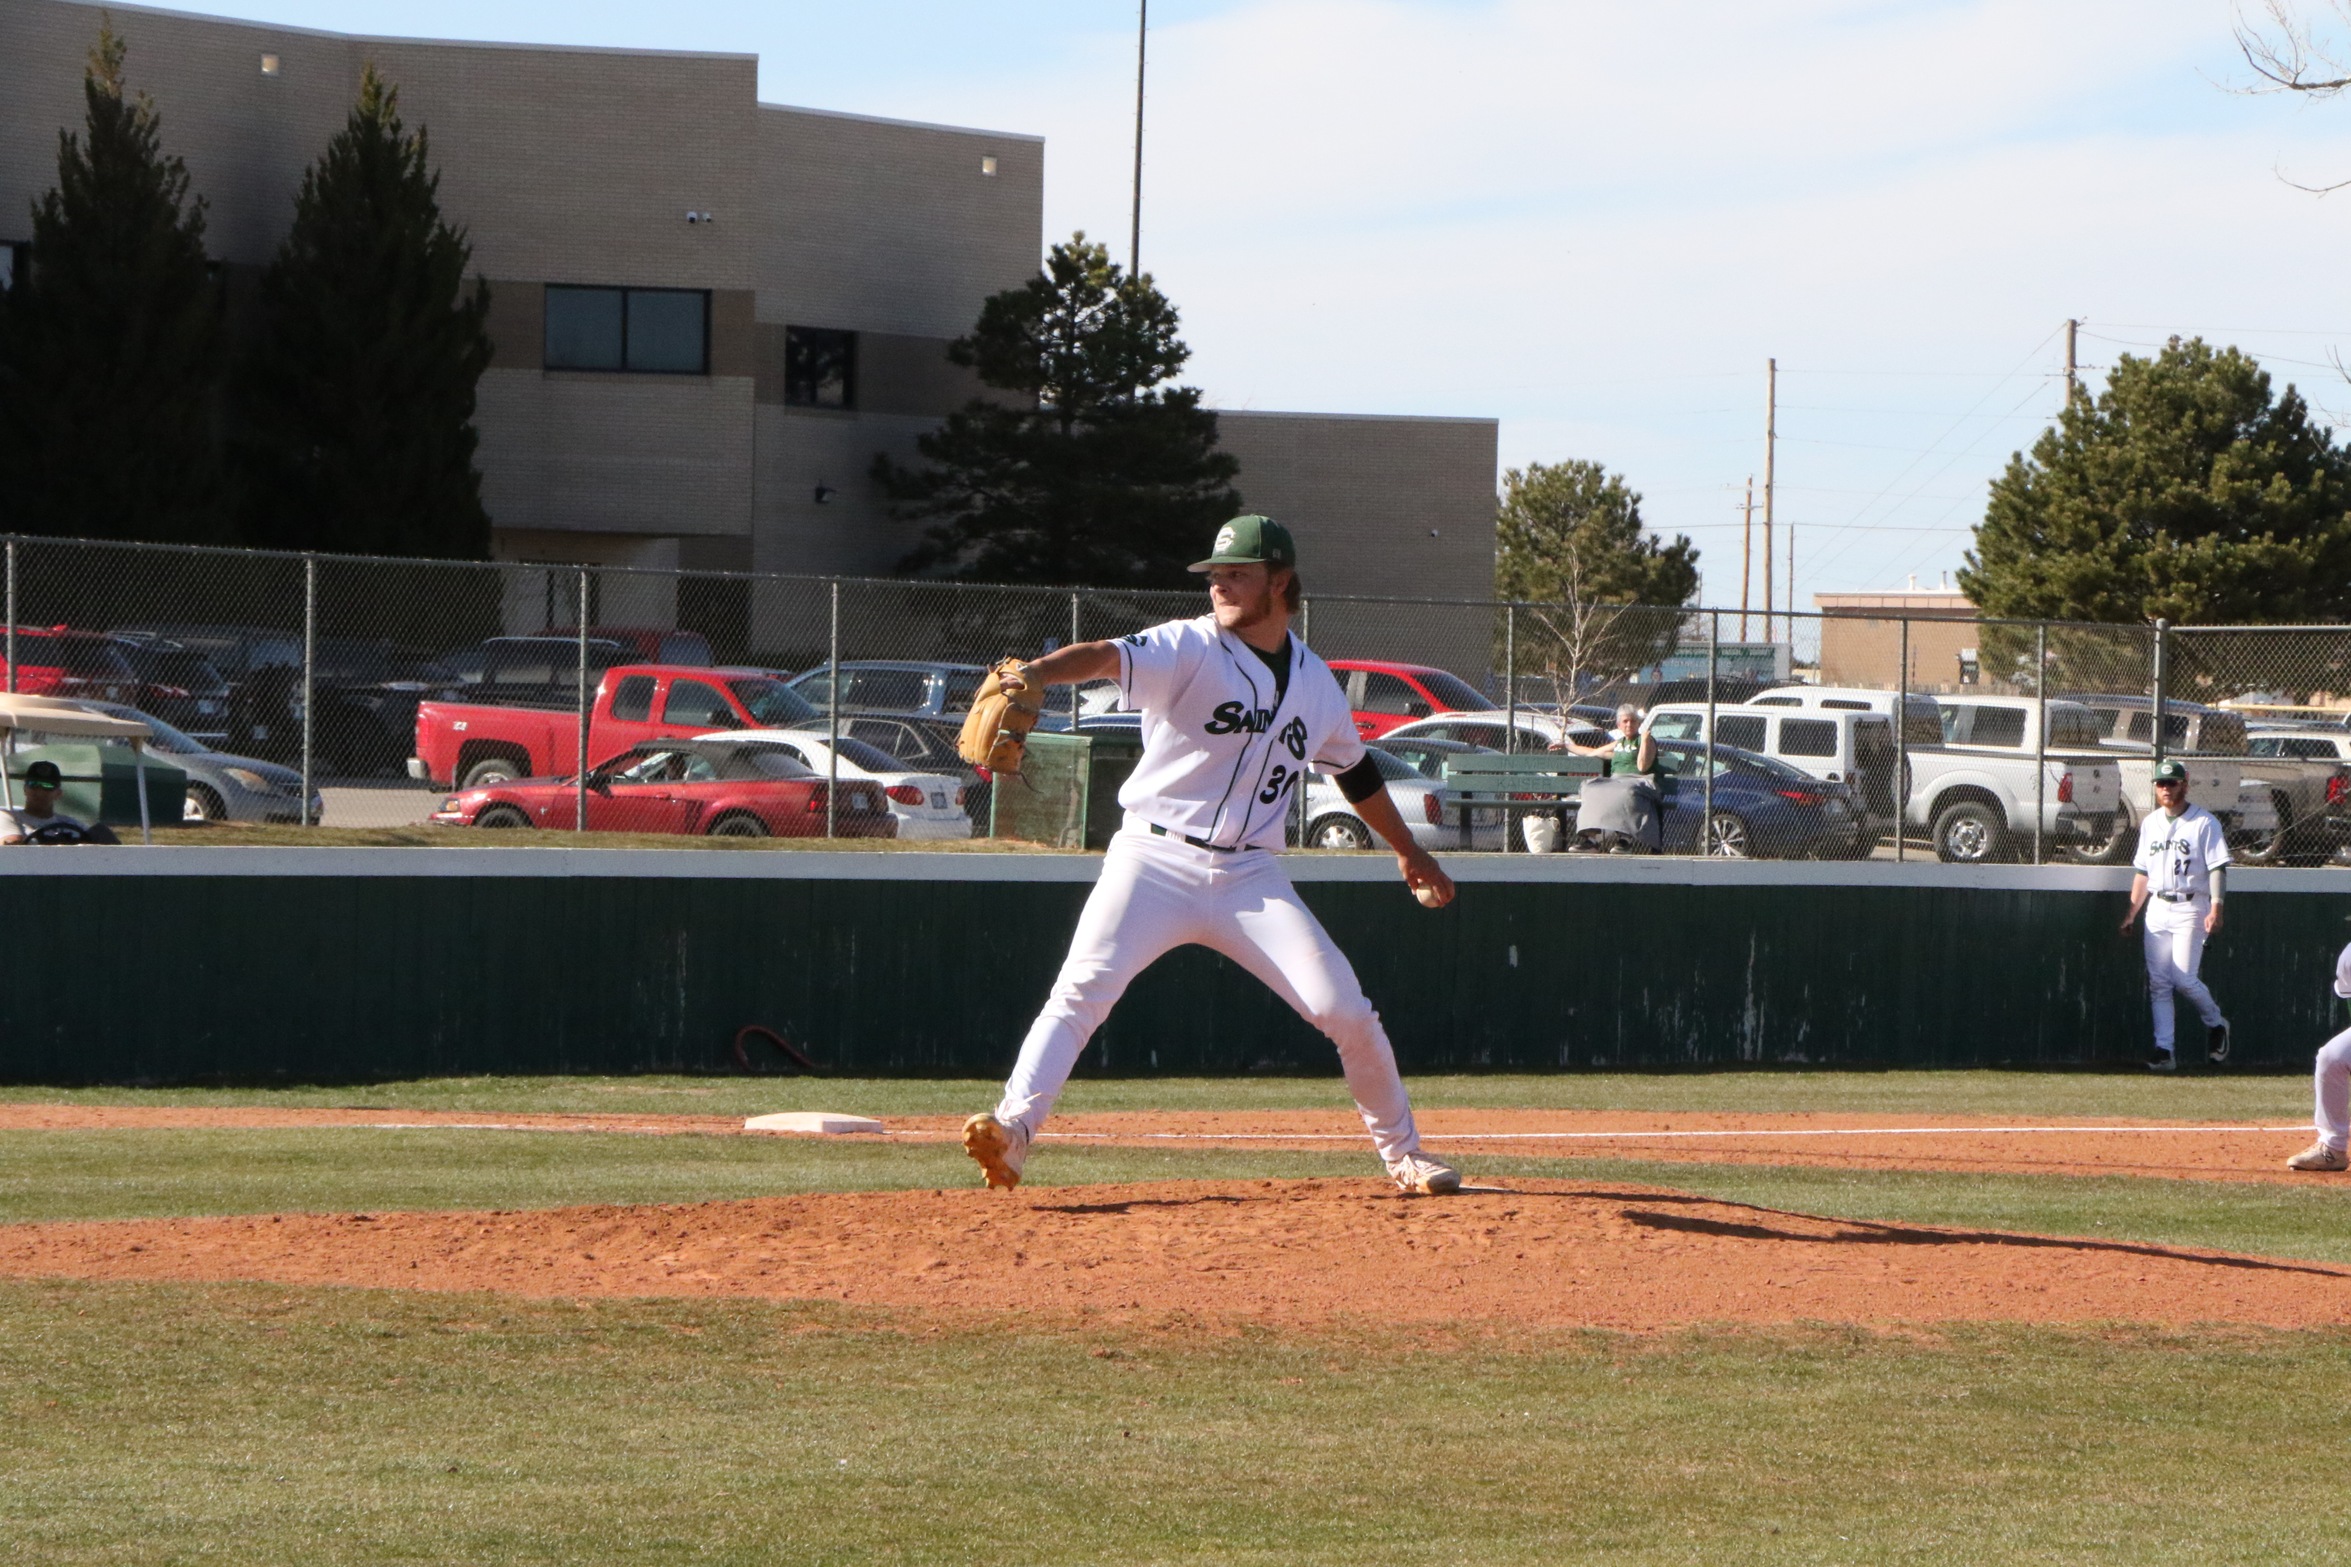 Curless strikeouts 16 as the Saints split with the Broncbusters